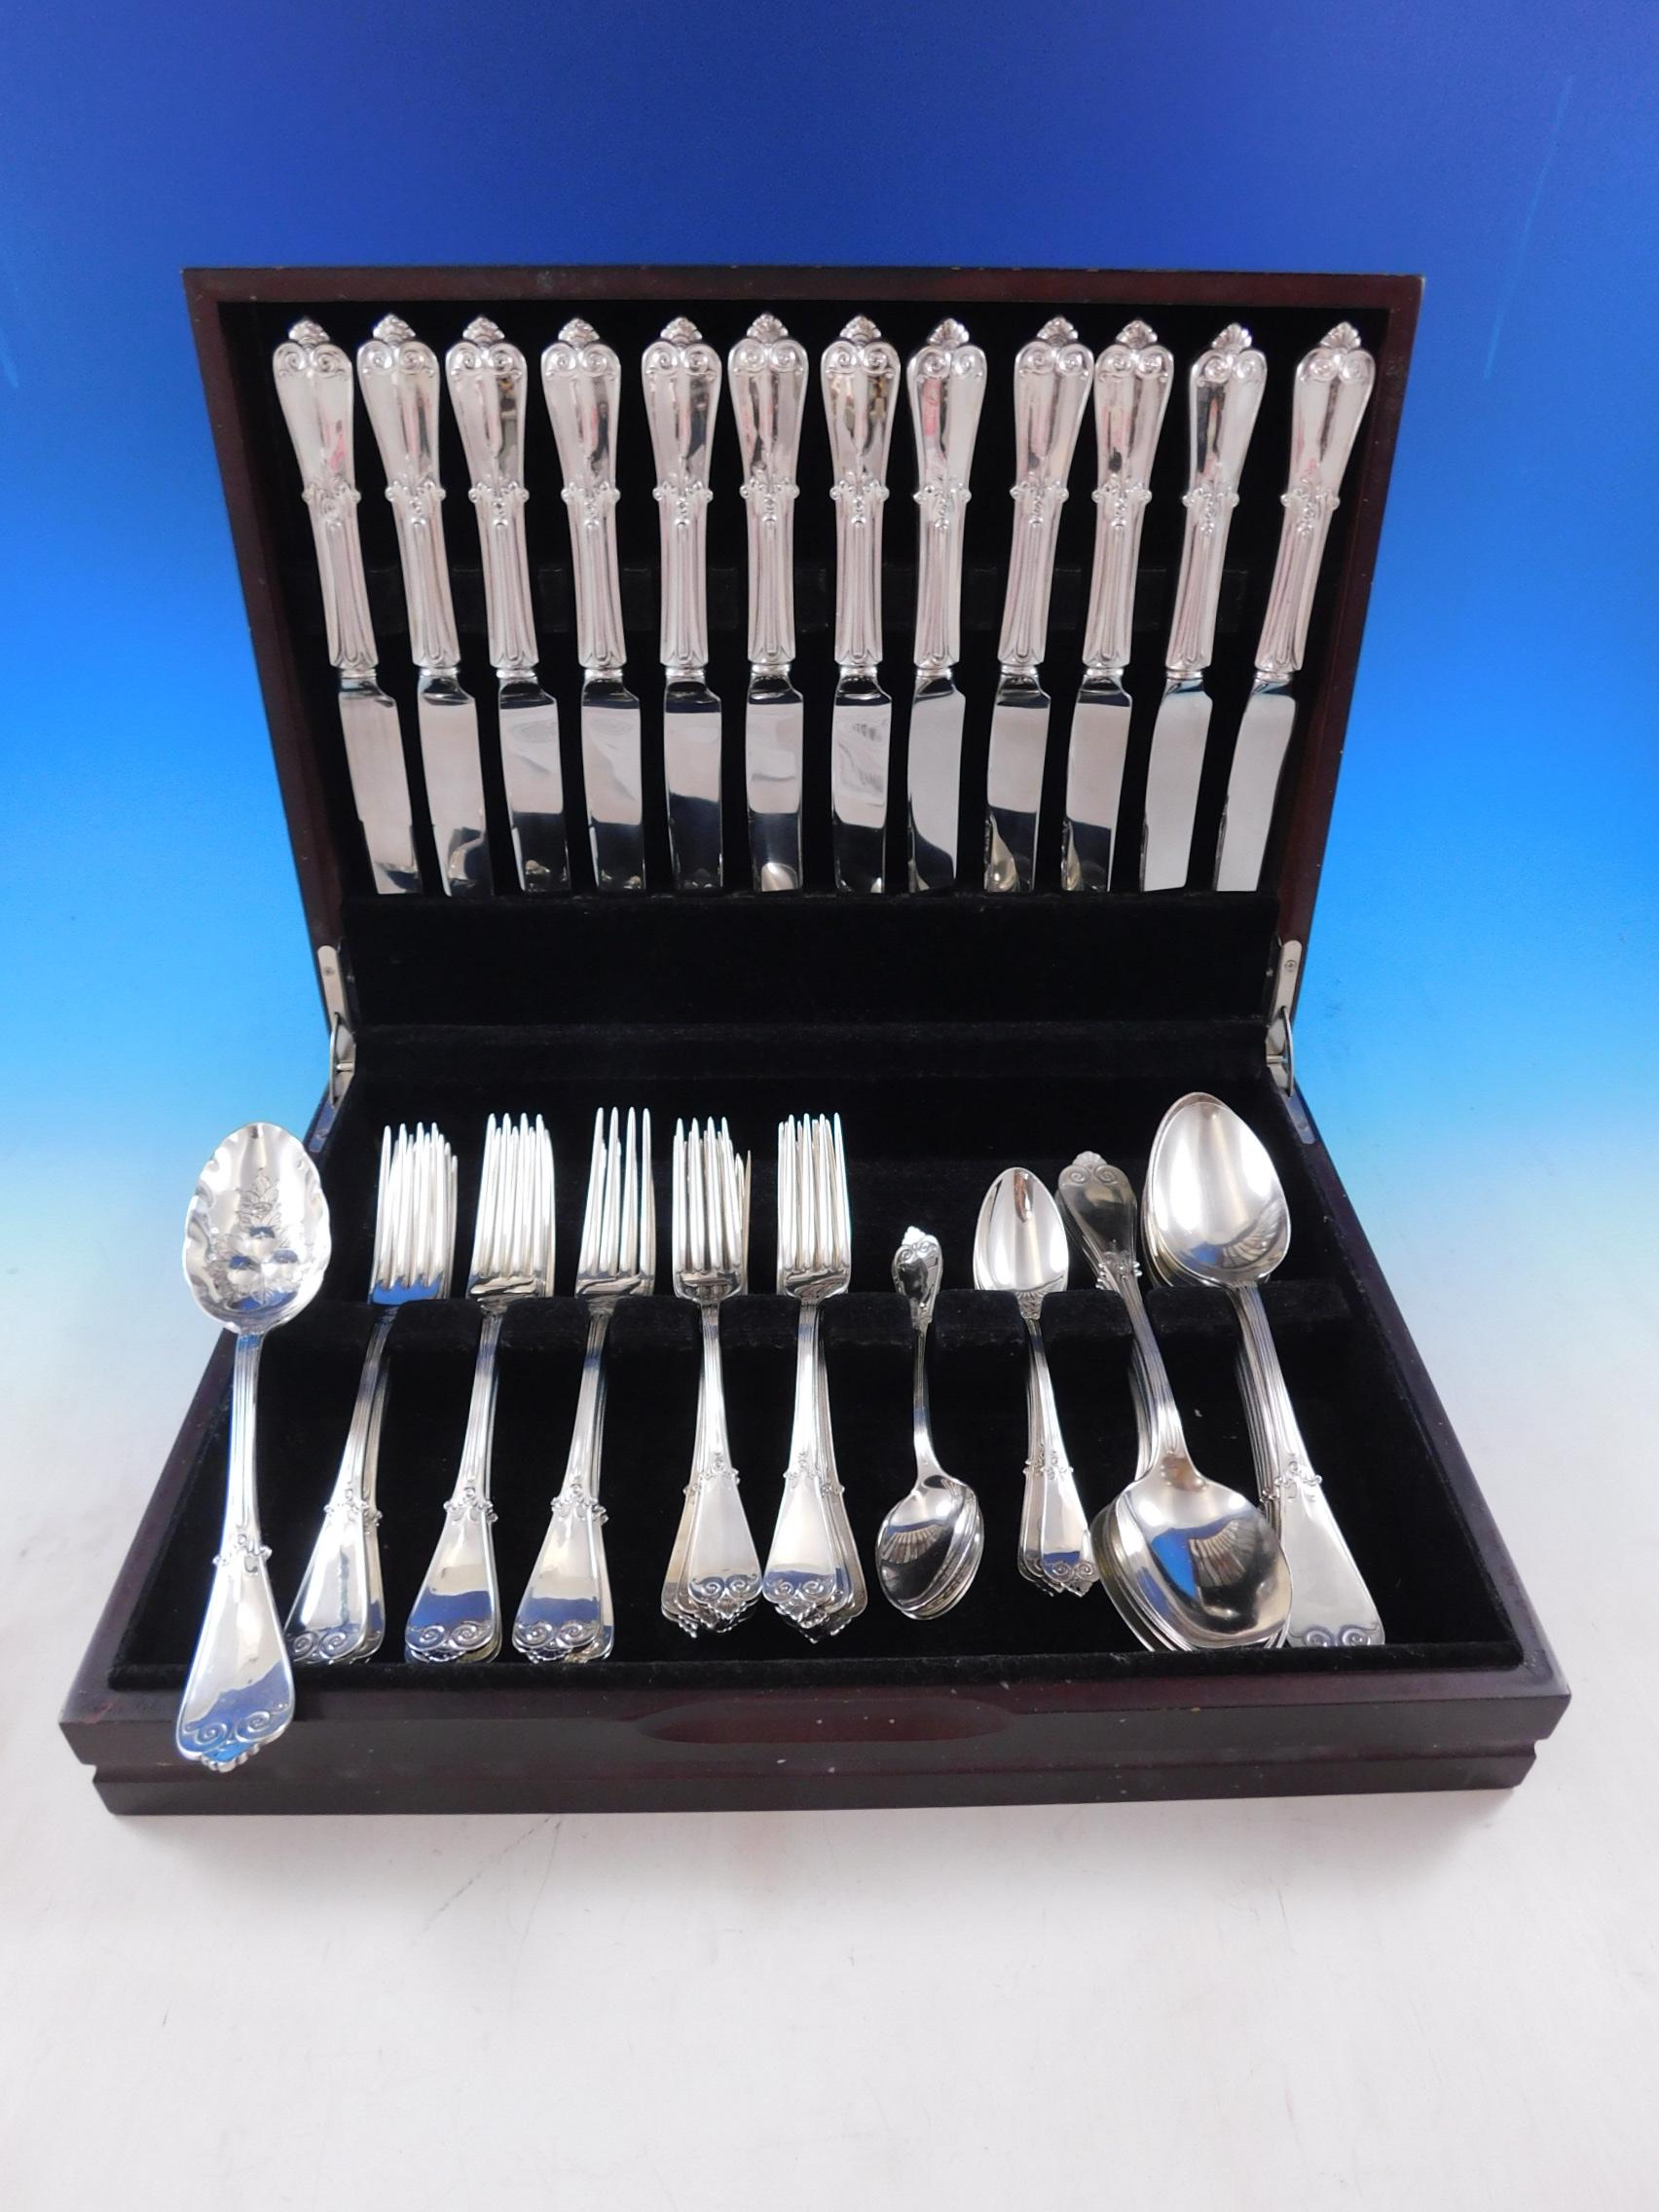 Dinner Size Beekman by Tiffany & Co. Sterling silver flatware set - 61 pieces. This set includes:

 12 Dinner Knives, 9 7/8